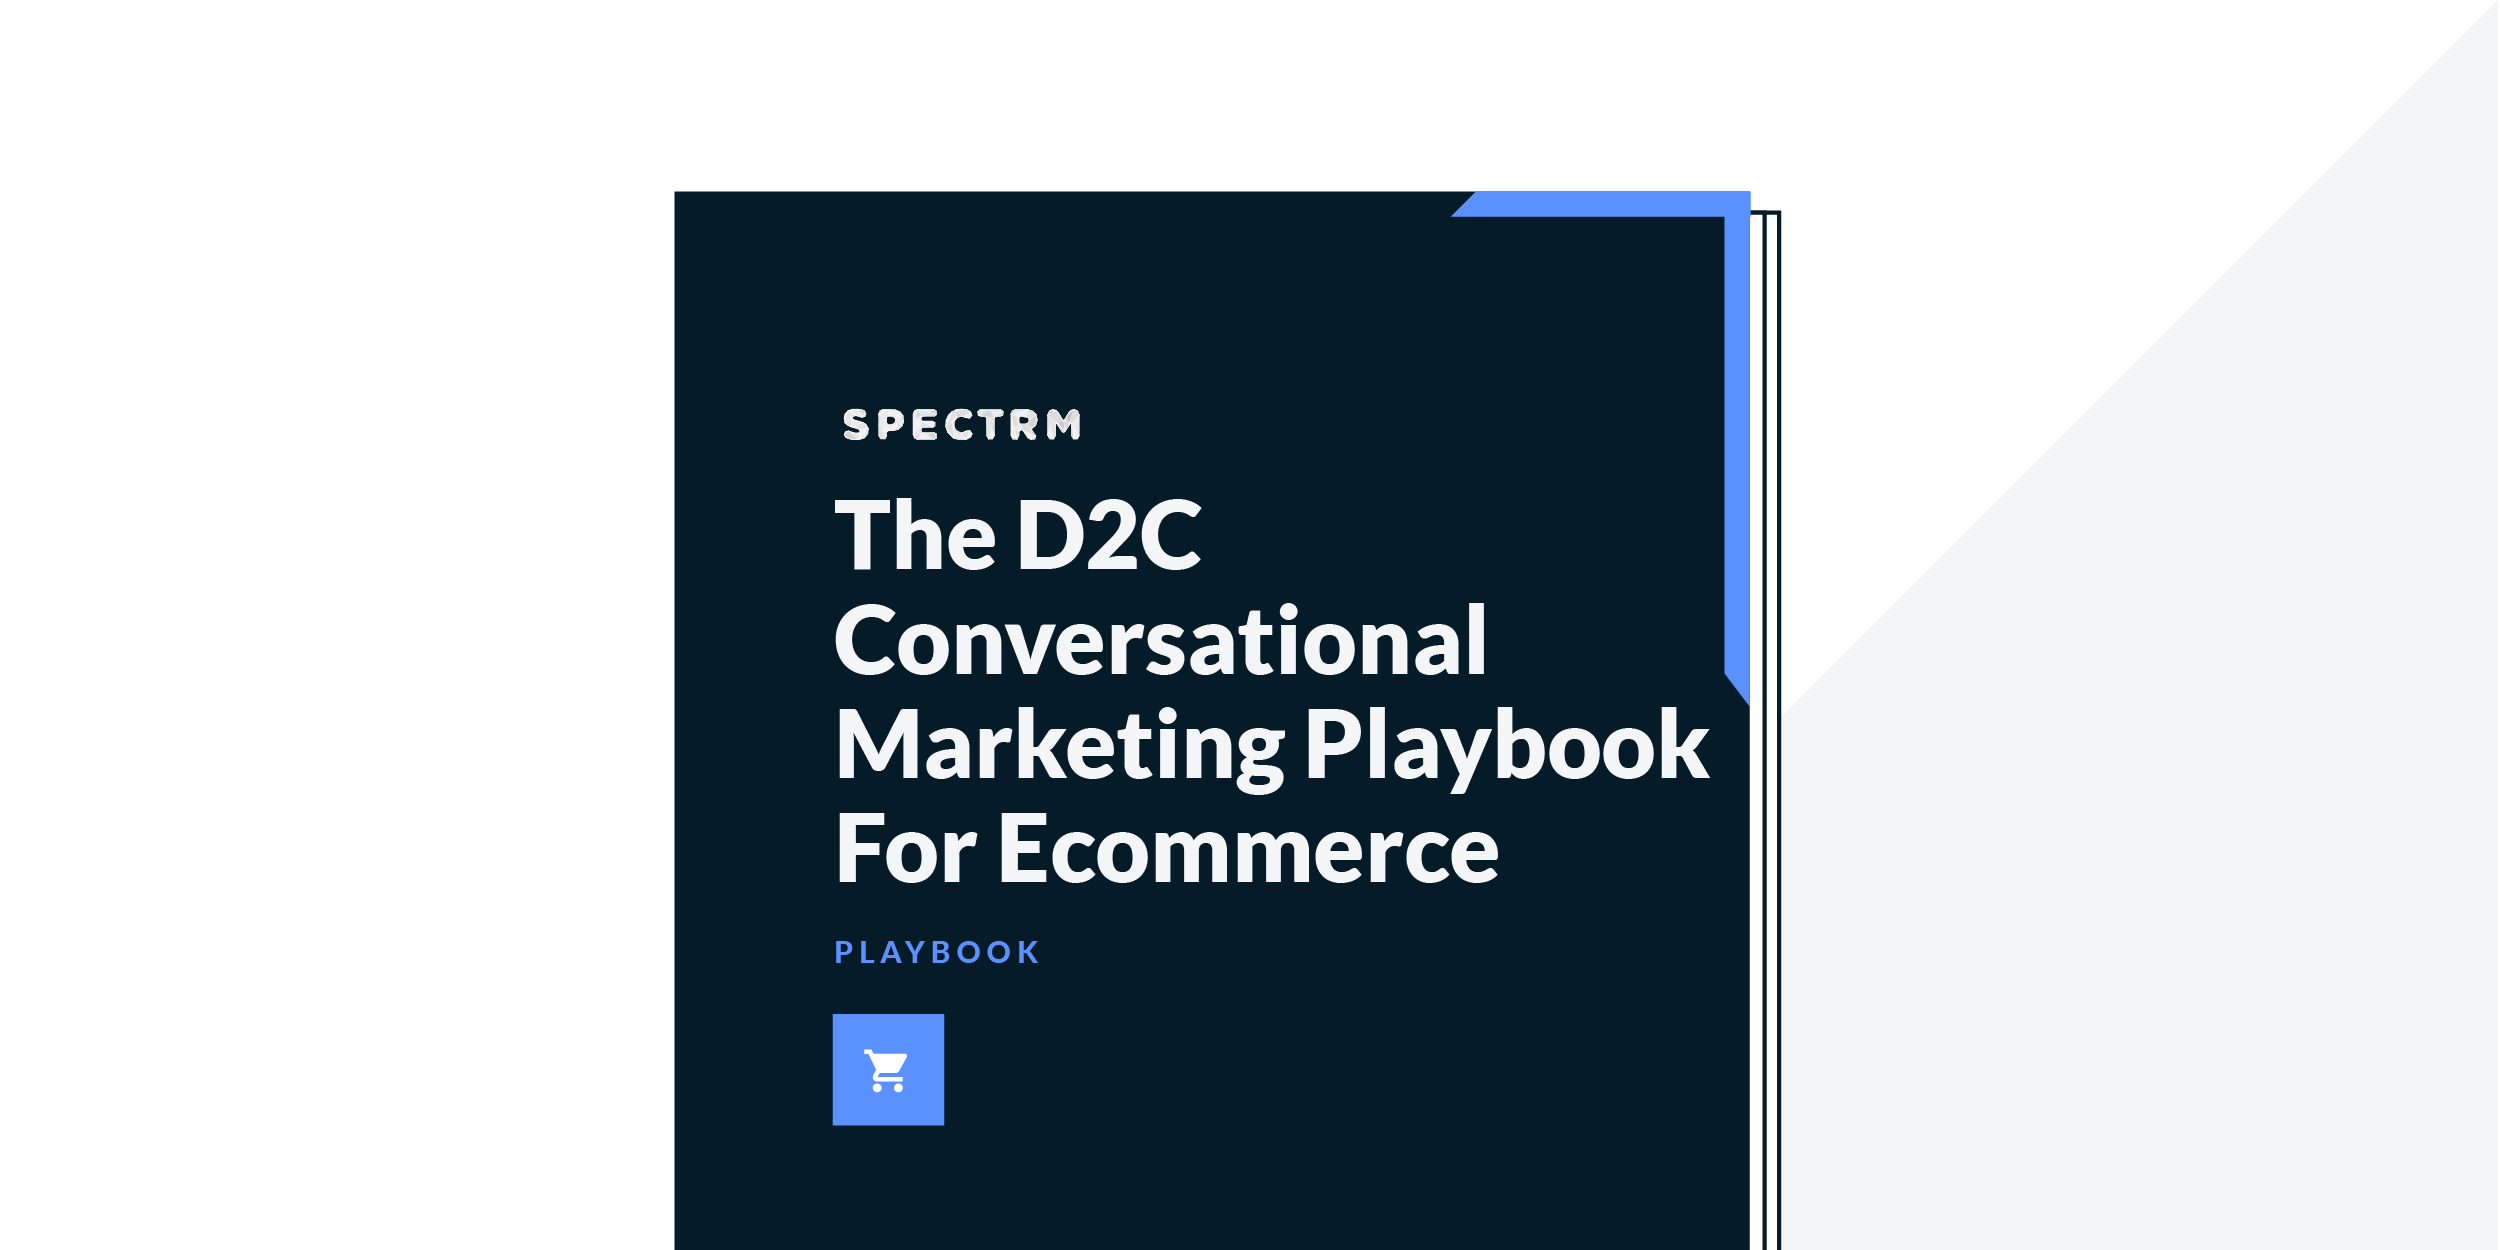 The_D2C_Conversational_Marketing_Playbook_for_Ecommerce